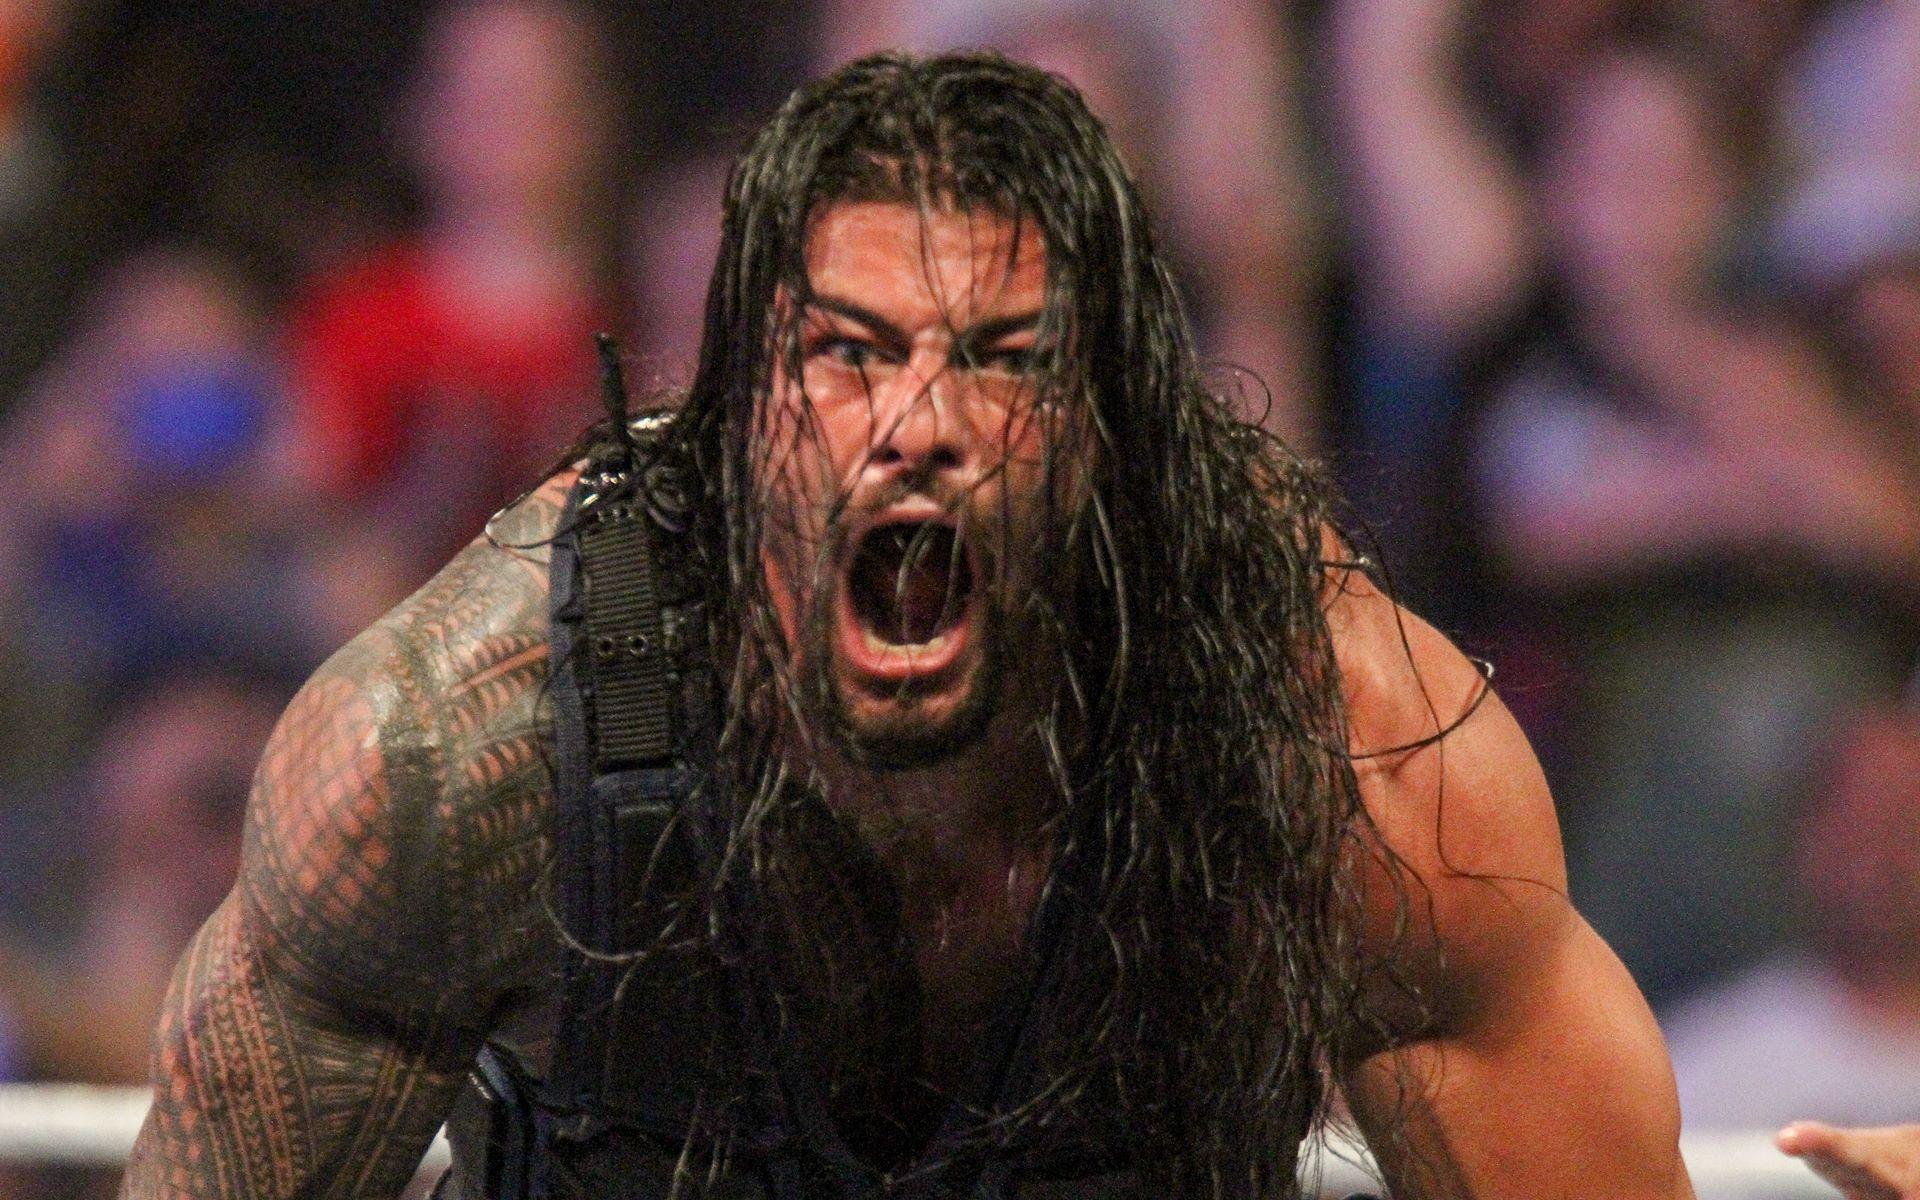 WWE Superstar Roman Reigns Latest HD Wallpaper And Photo